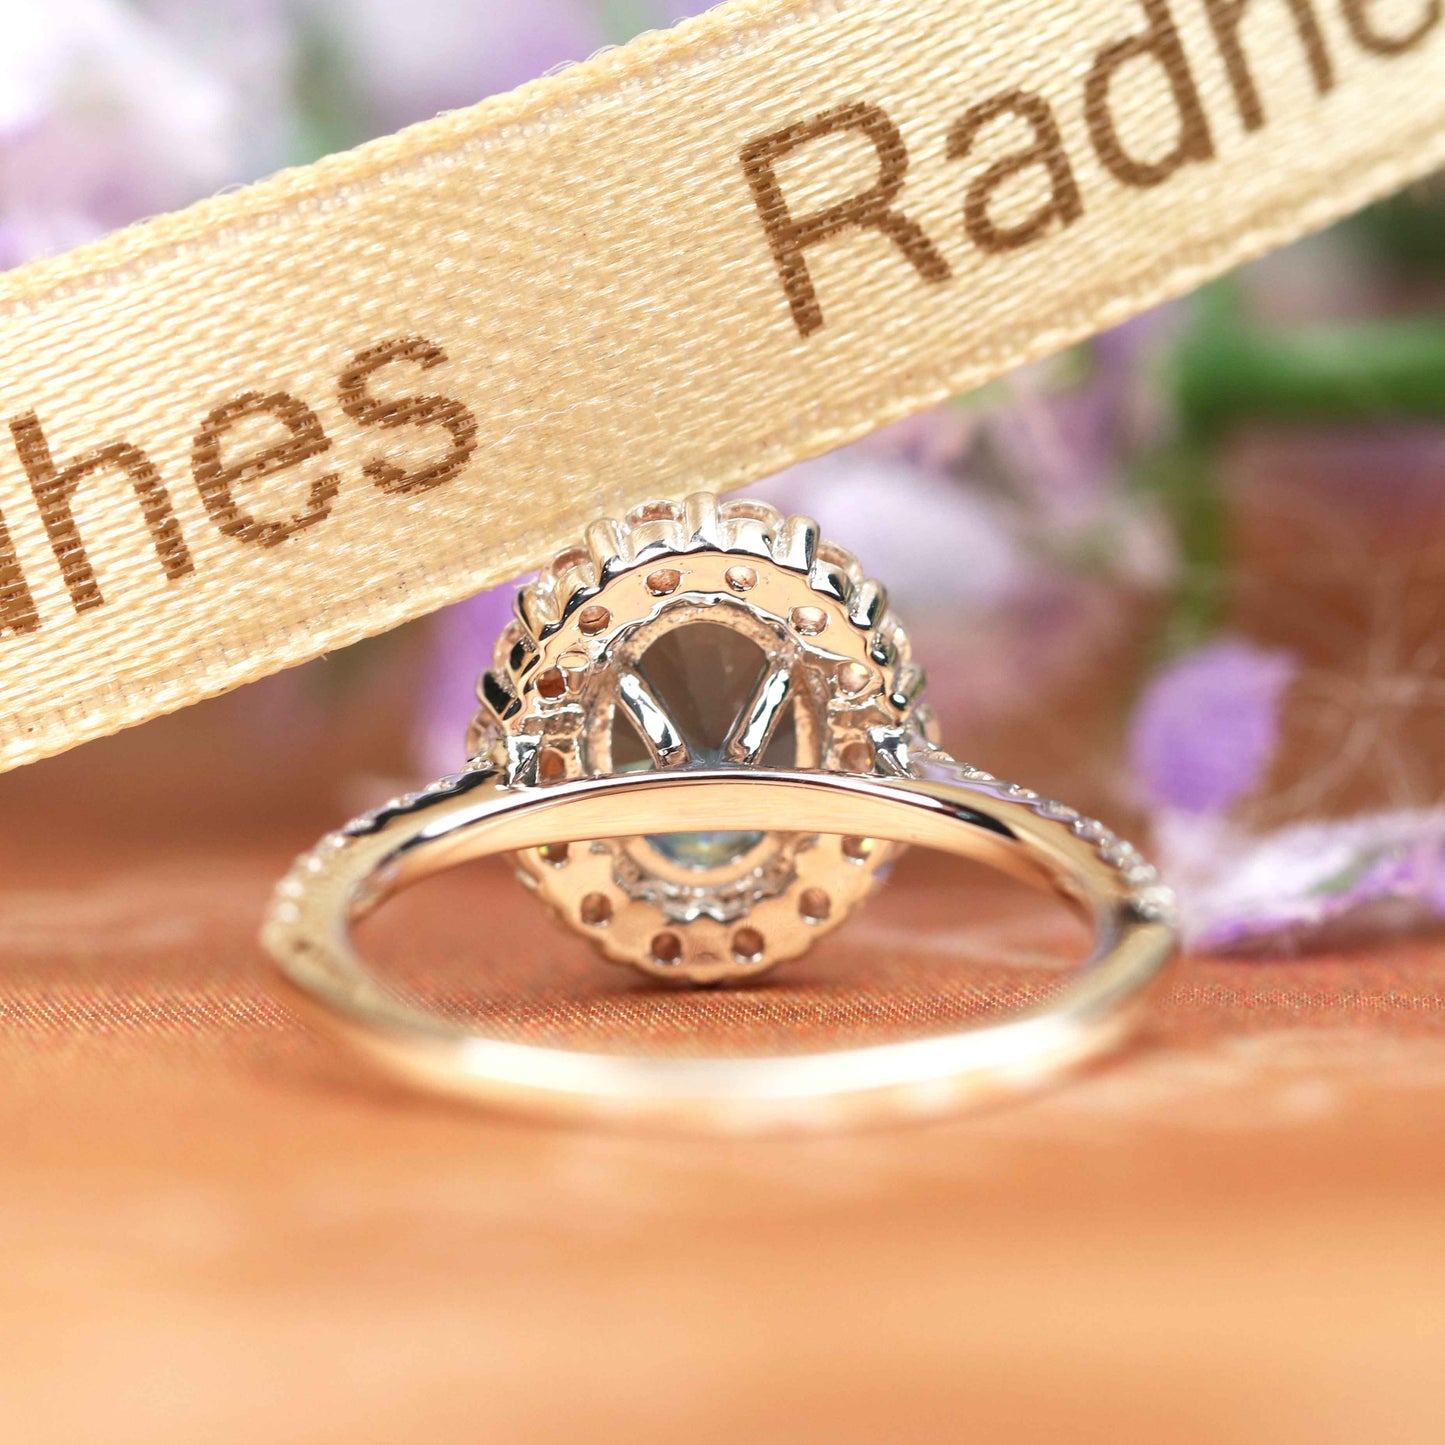 Luxurious 1.5 carat Oval Cut Alexandrite and Diamond Halo Flower Ring for Her in White Gold